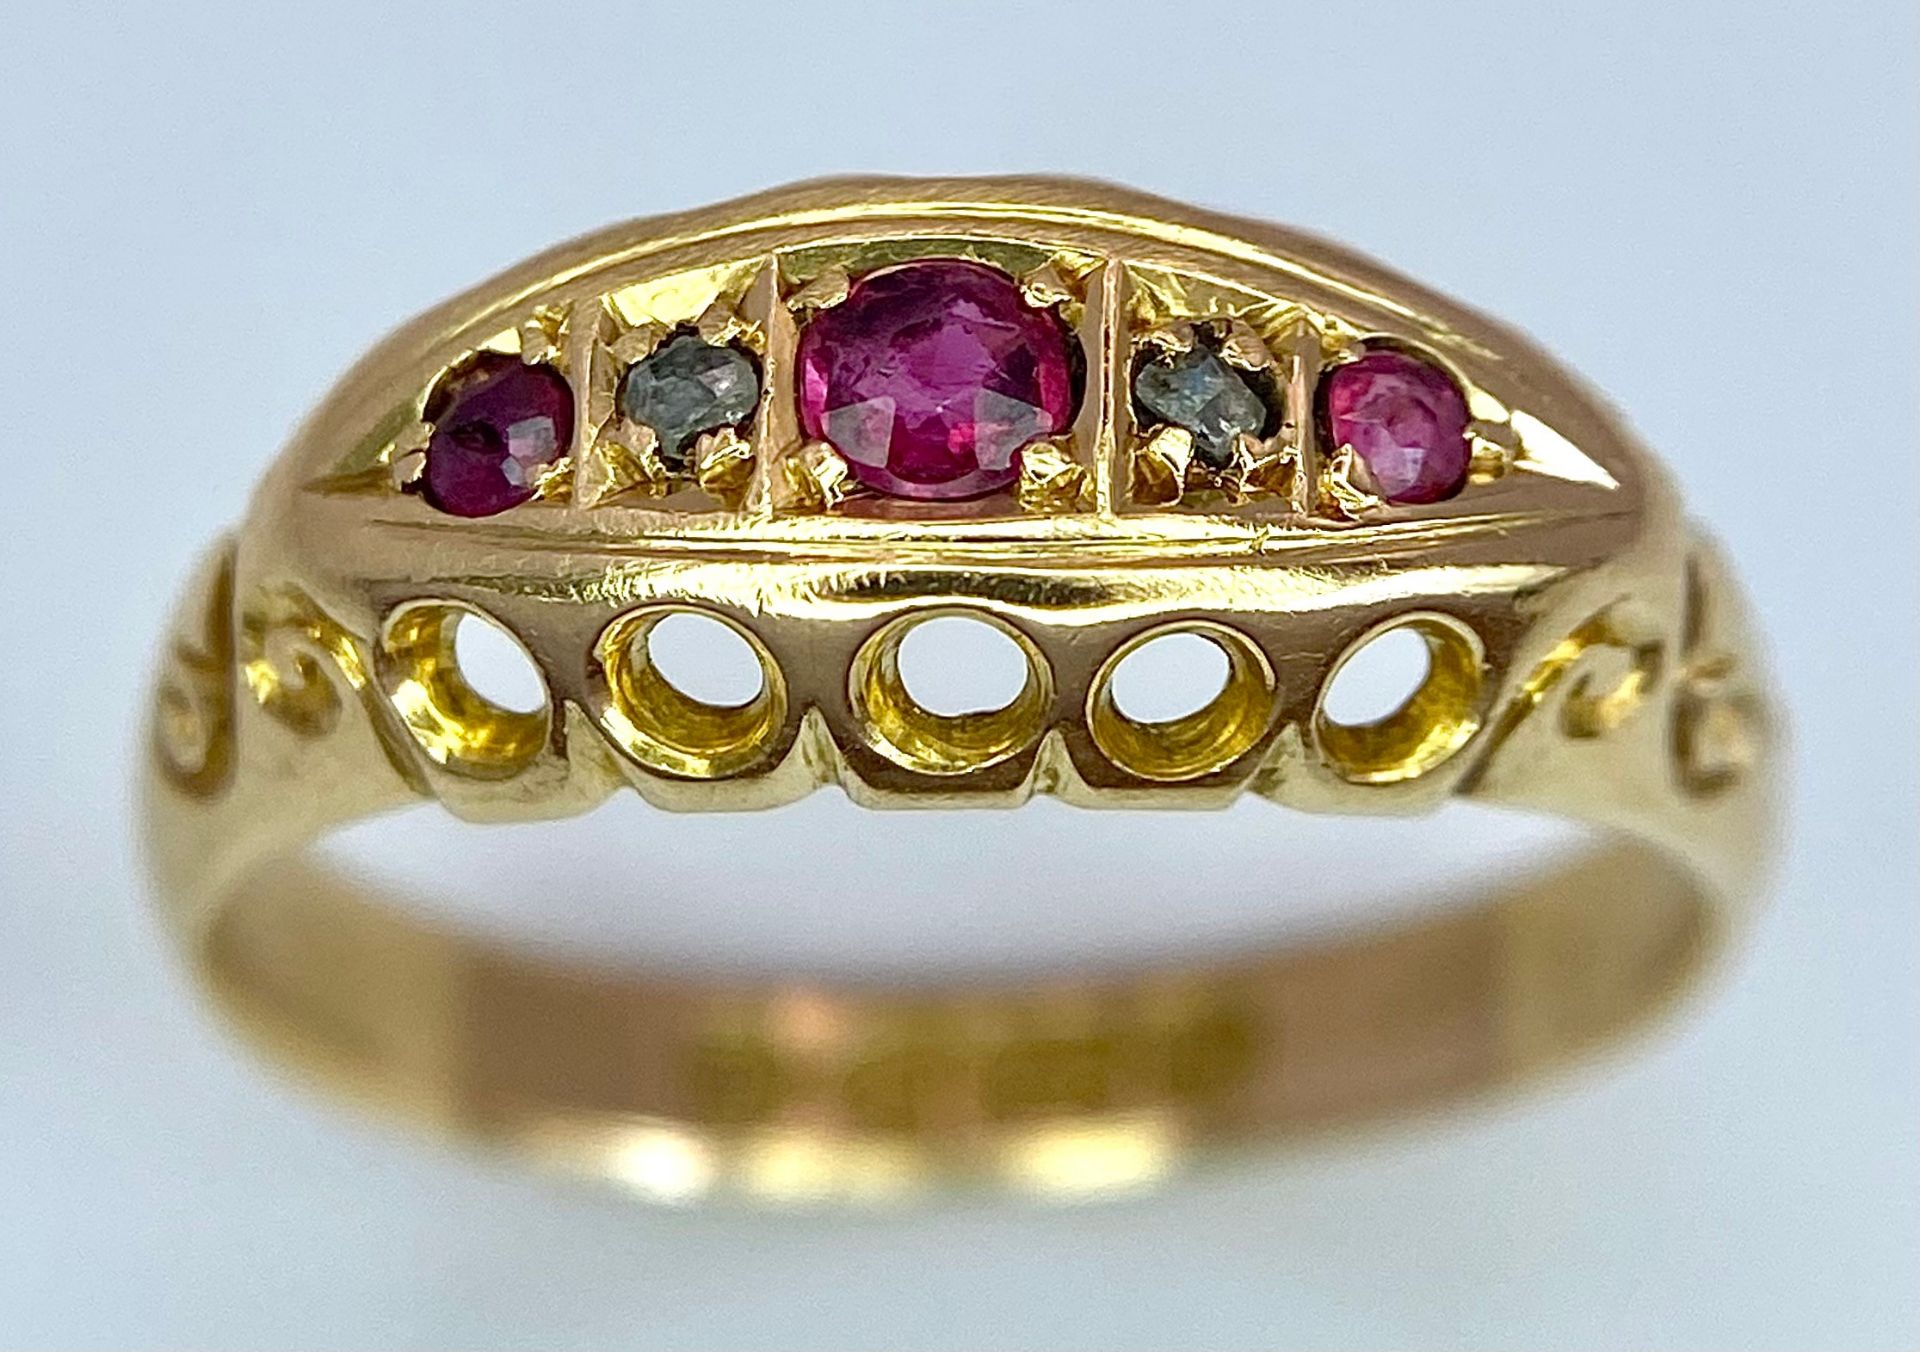 A 18K YELLOW GOLD ANTIQUE DIAMOND & RUBY RING 2.3G SIZE L HALLMARKED CHESTER 1729 A/S 1040 - 2 - Image 3 of 6